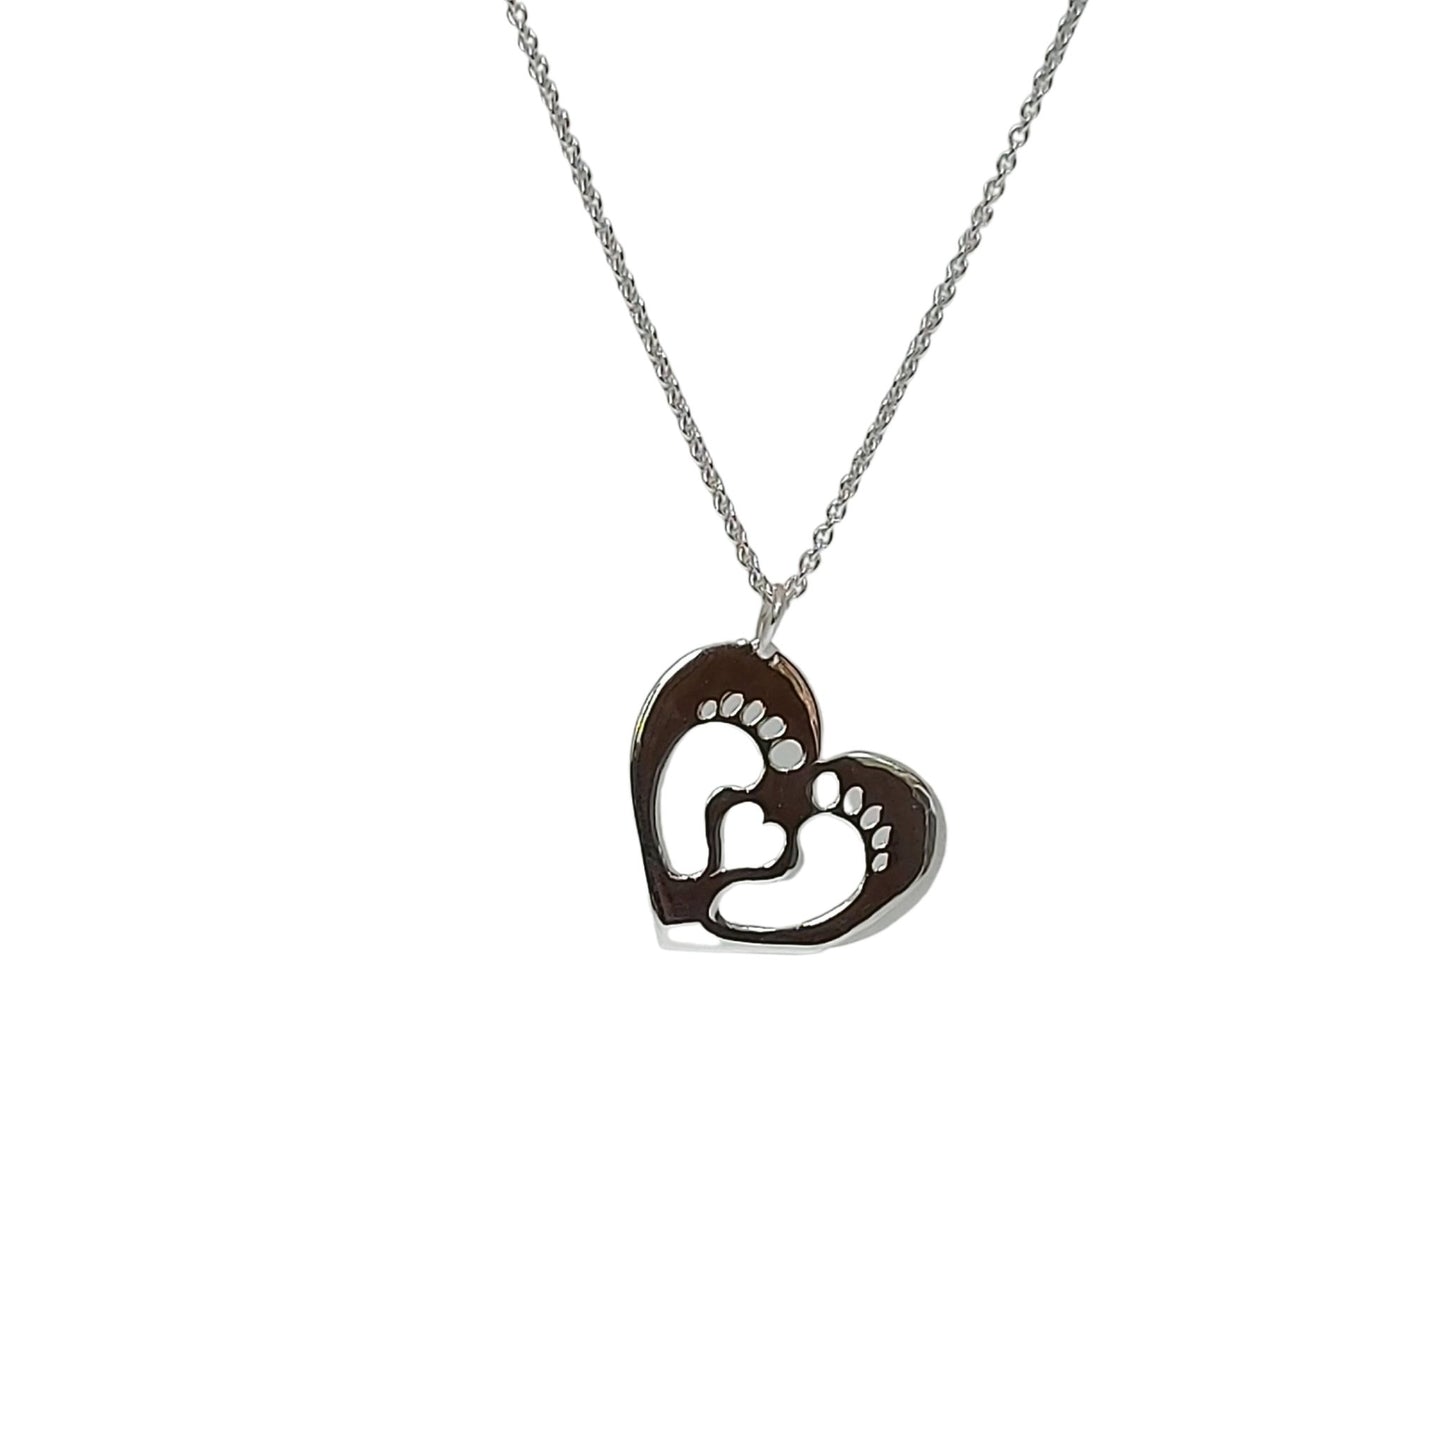 Clubfoot strong necklace. Stirling silver heart pendant with two feet and heart cut out